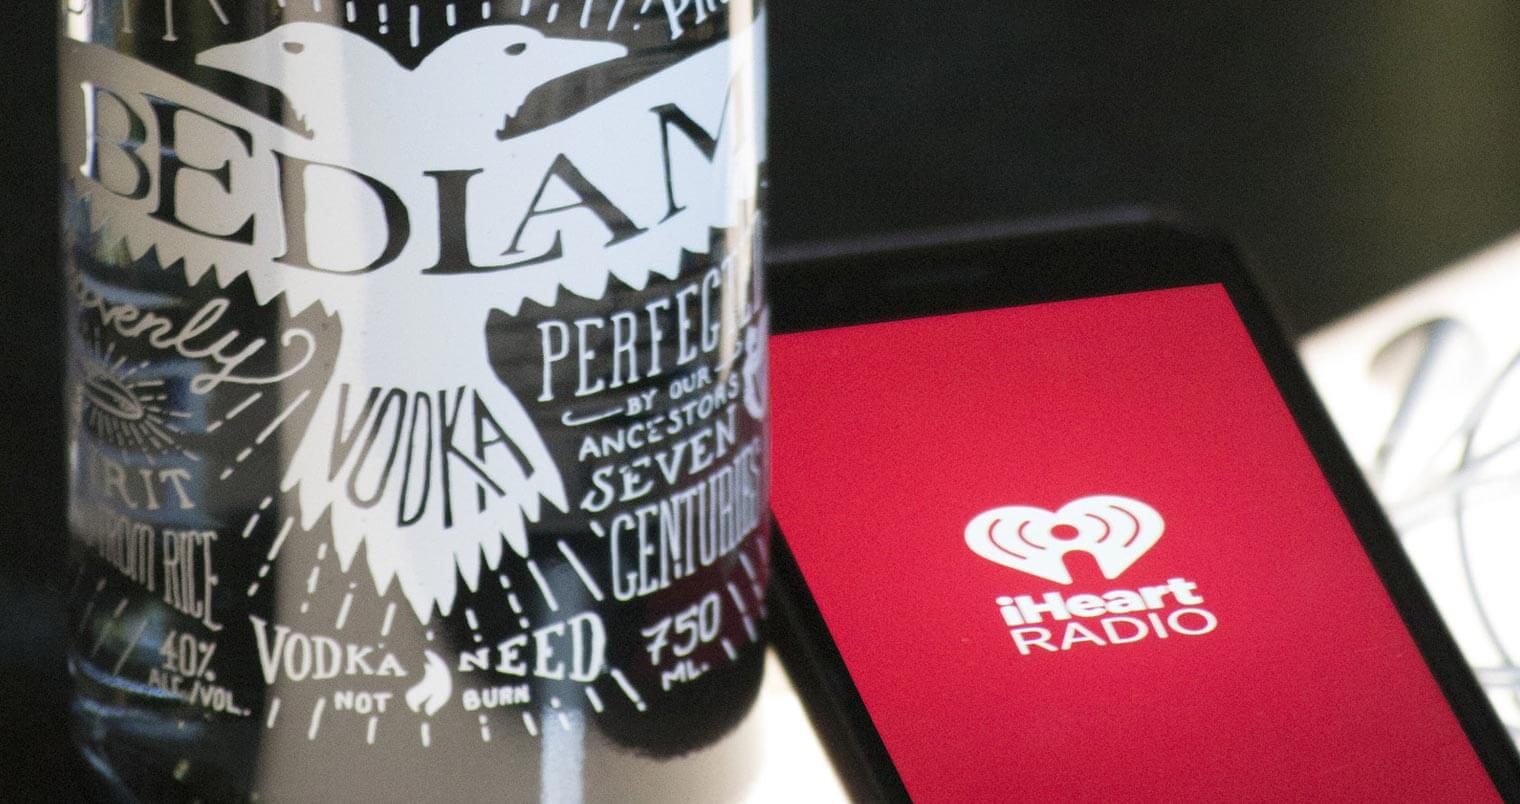 Bedlam Vodka Teams Up With iHeartMedia To Present The Bedlam Vodka Sound Stages, featured image